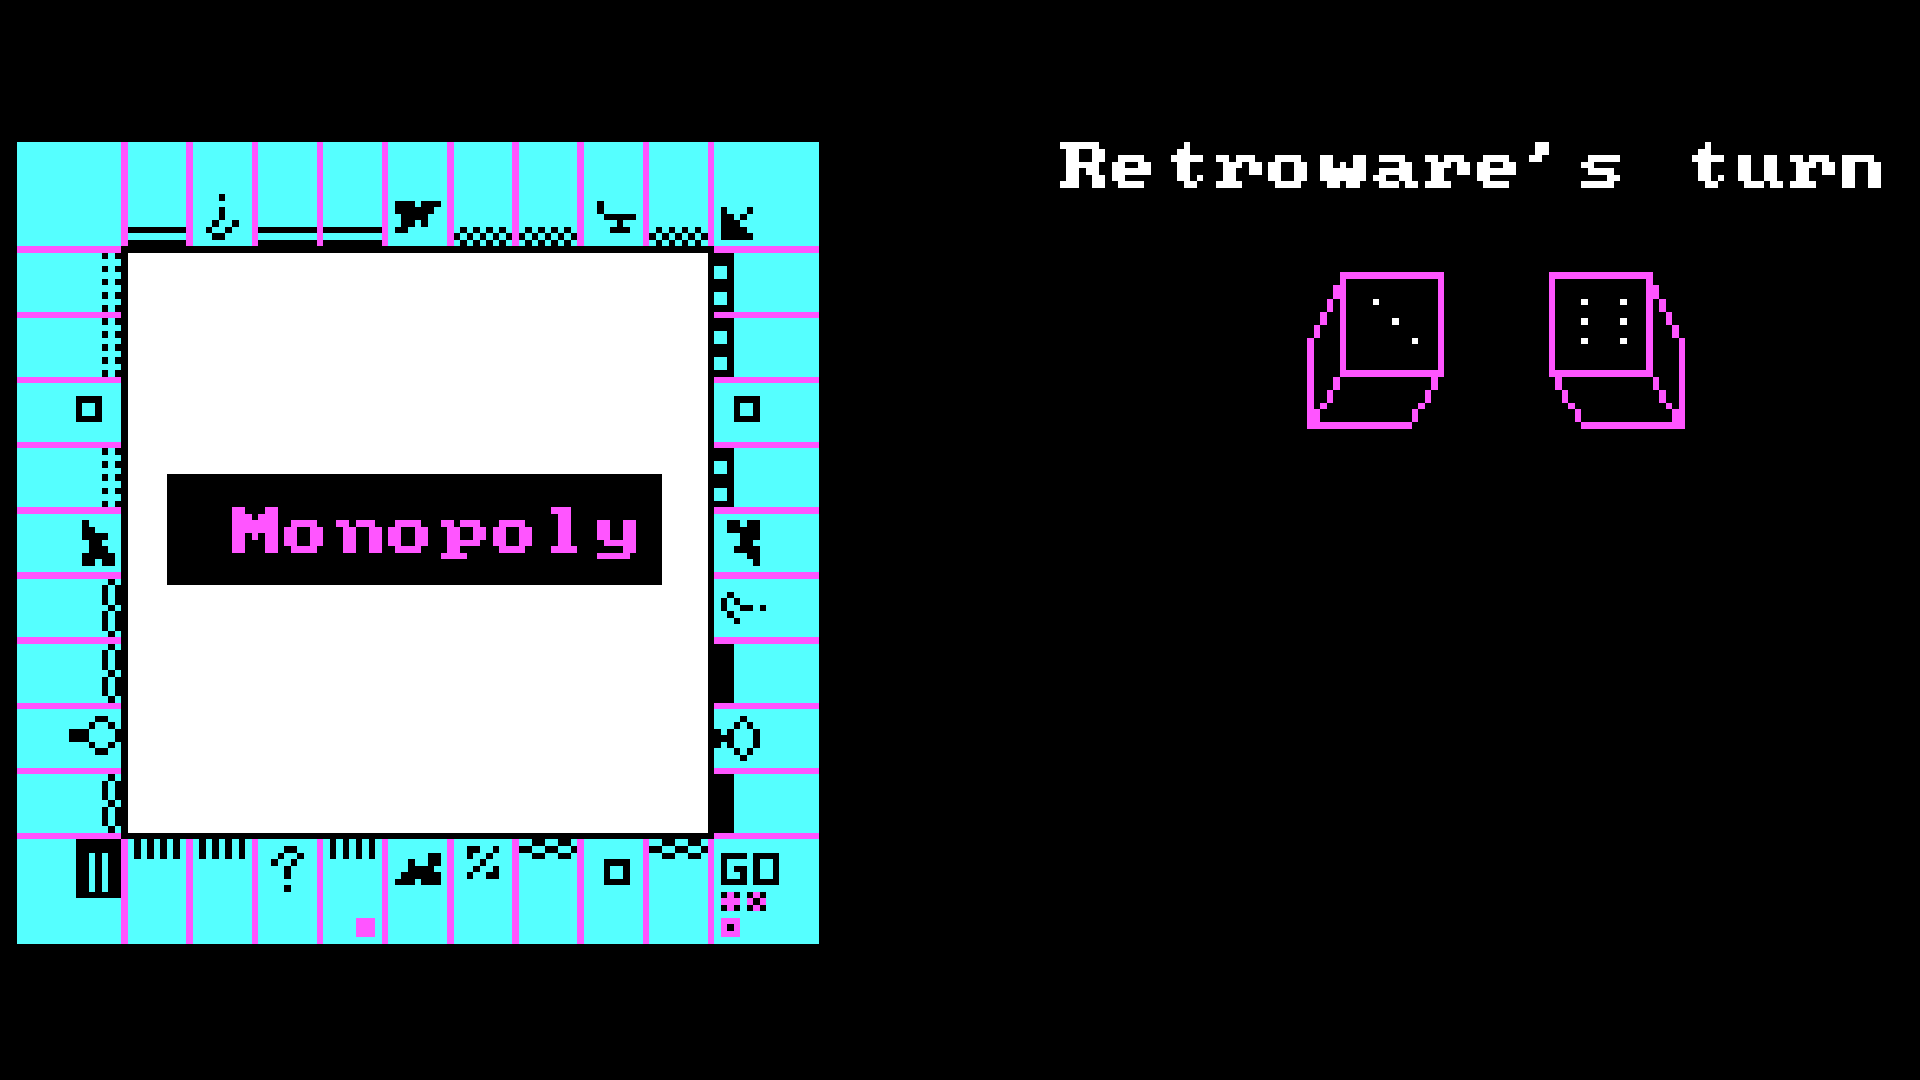 Image of gameplay from MONOPOLY (D. Gibson, 1987)